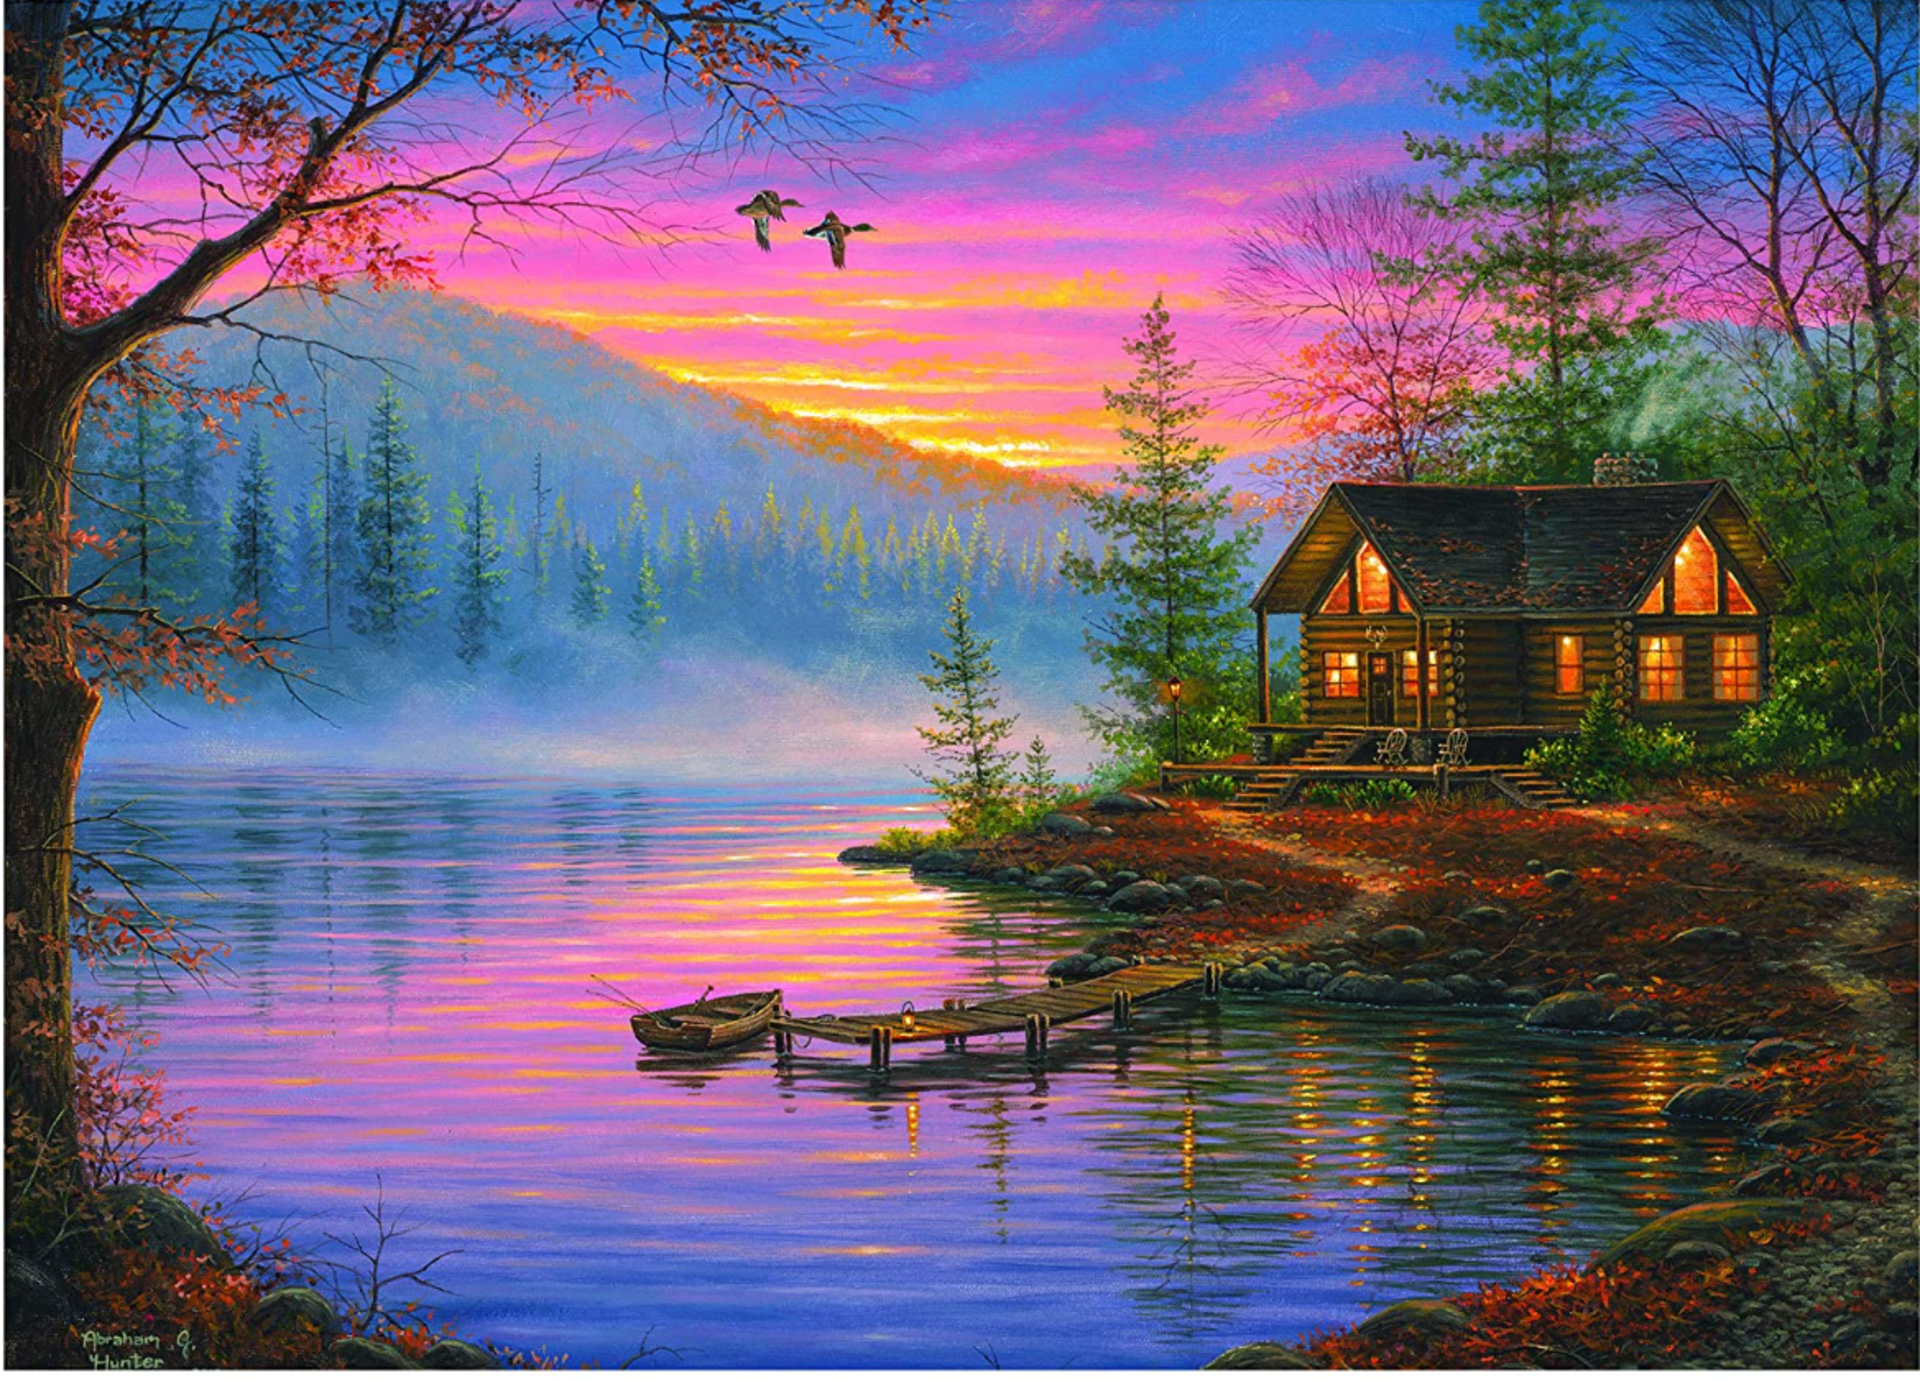 Rivers Edge Products Jigsaw Puzzle in Tin Box - 1000 Pieces